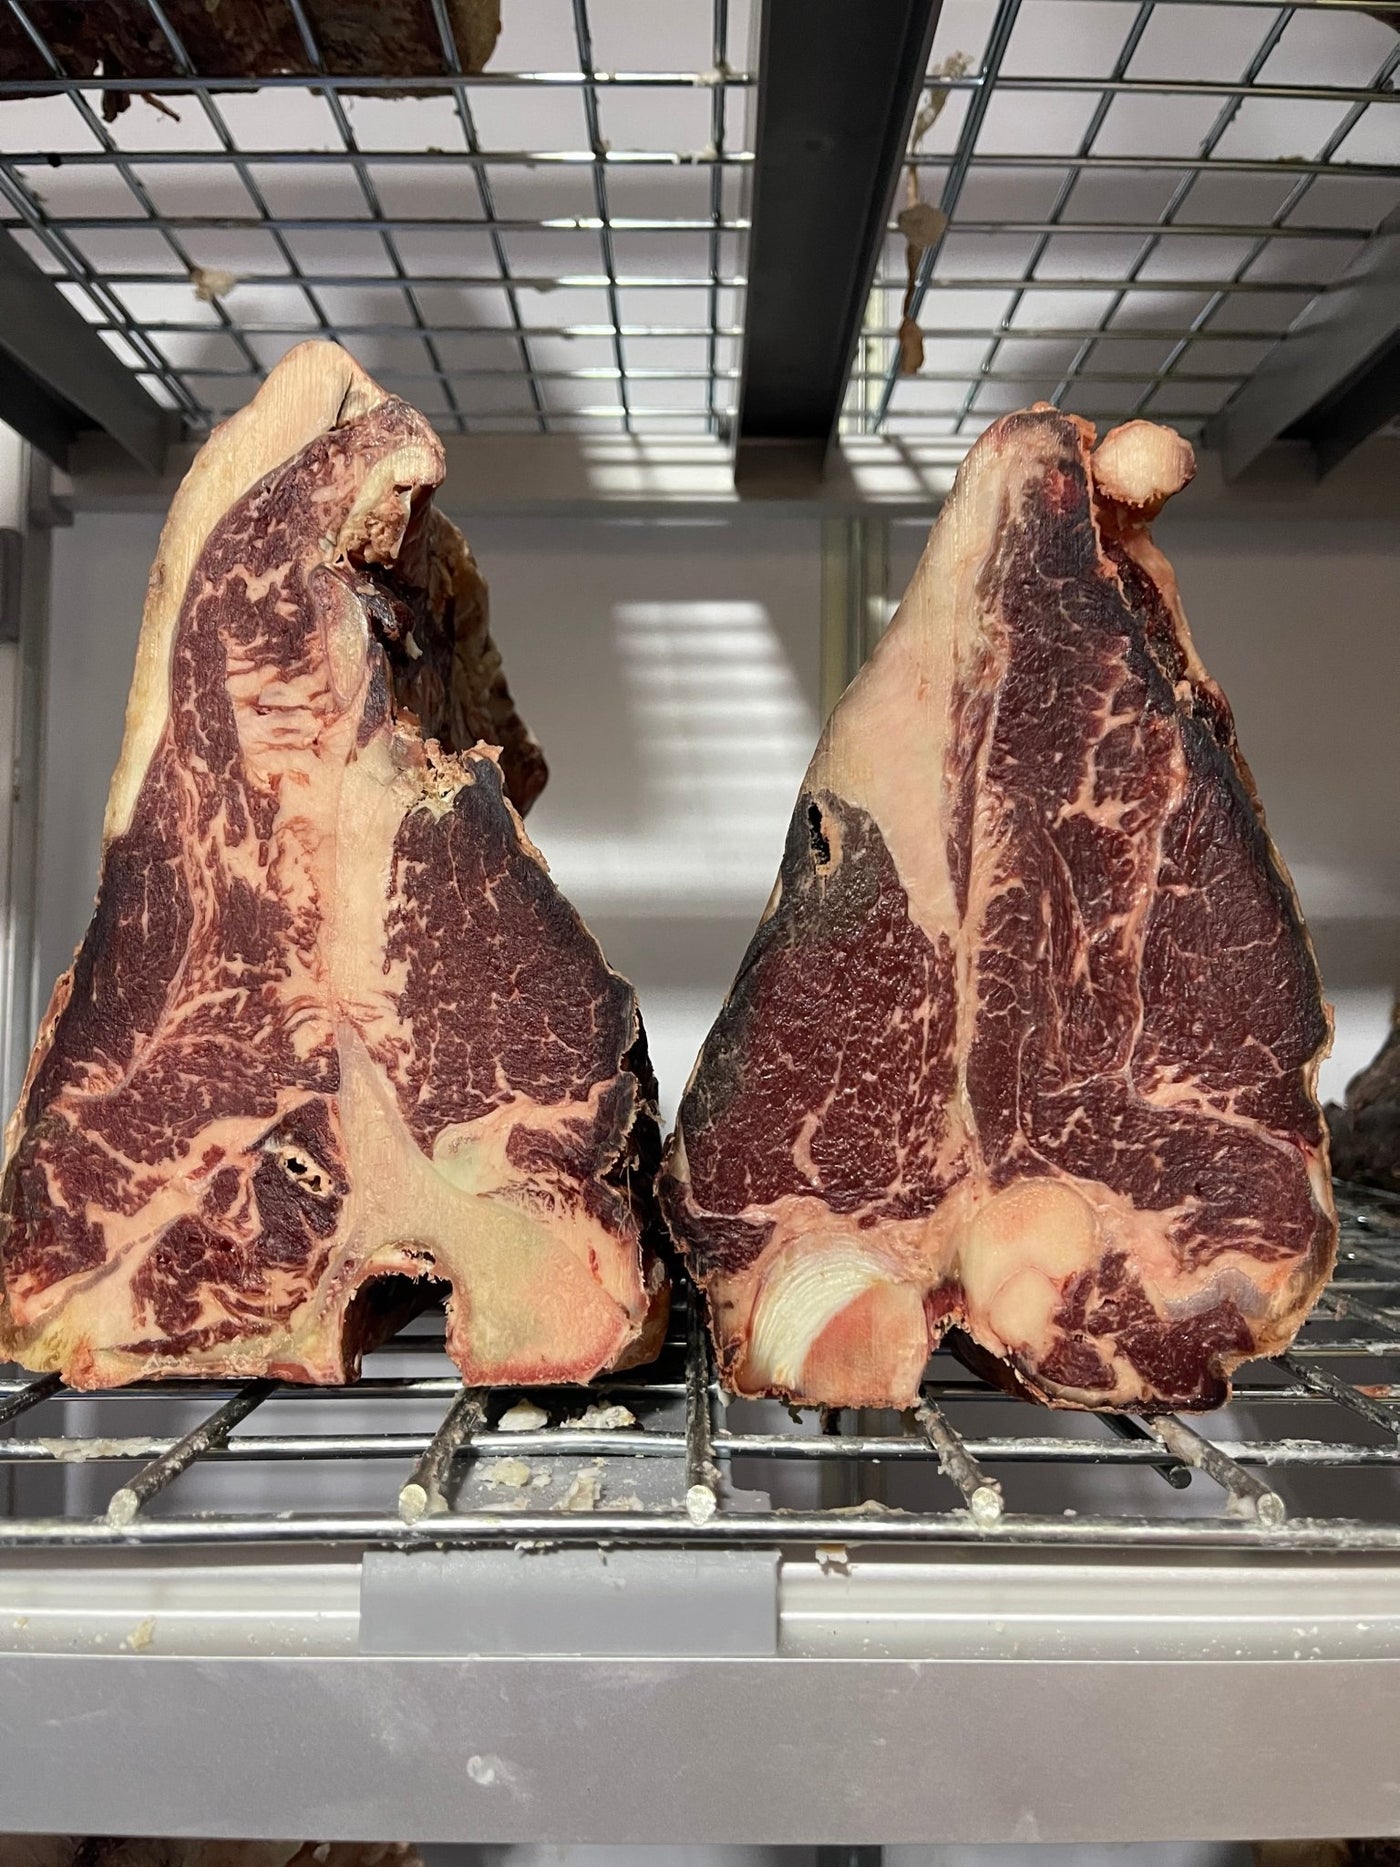 45 Day Dry-Aged German Ex Dairy Porterhouse - Thomas Joseph Butchery - Ethical Dry-Aged Meat The Best Steak UK Thomas Joseph Butchery